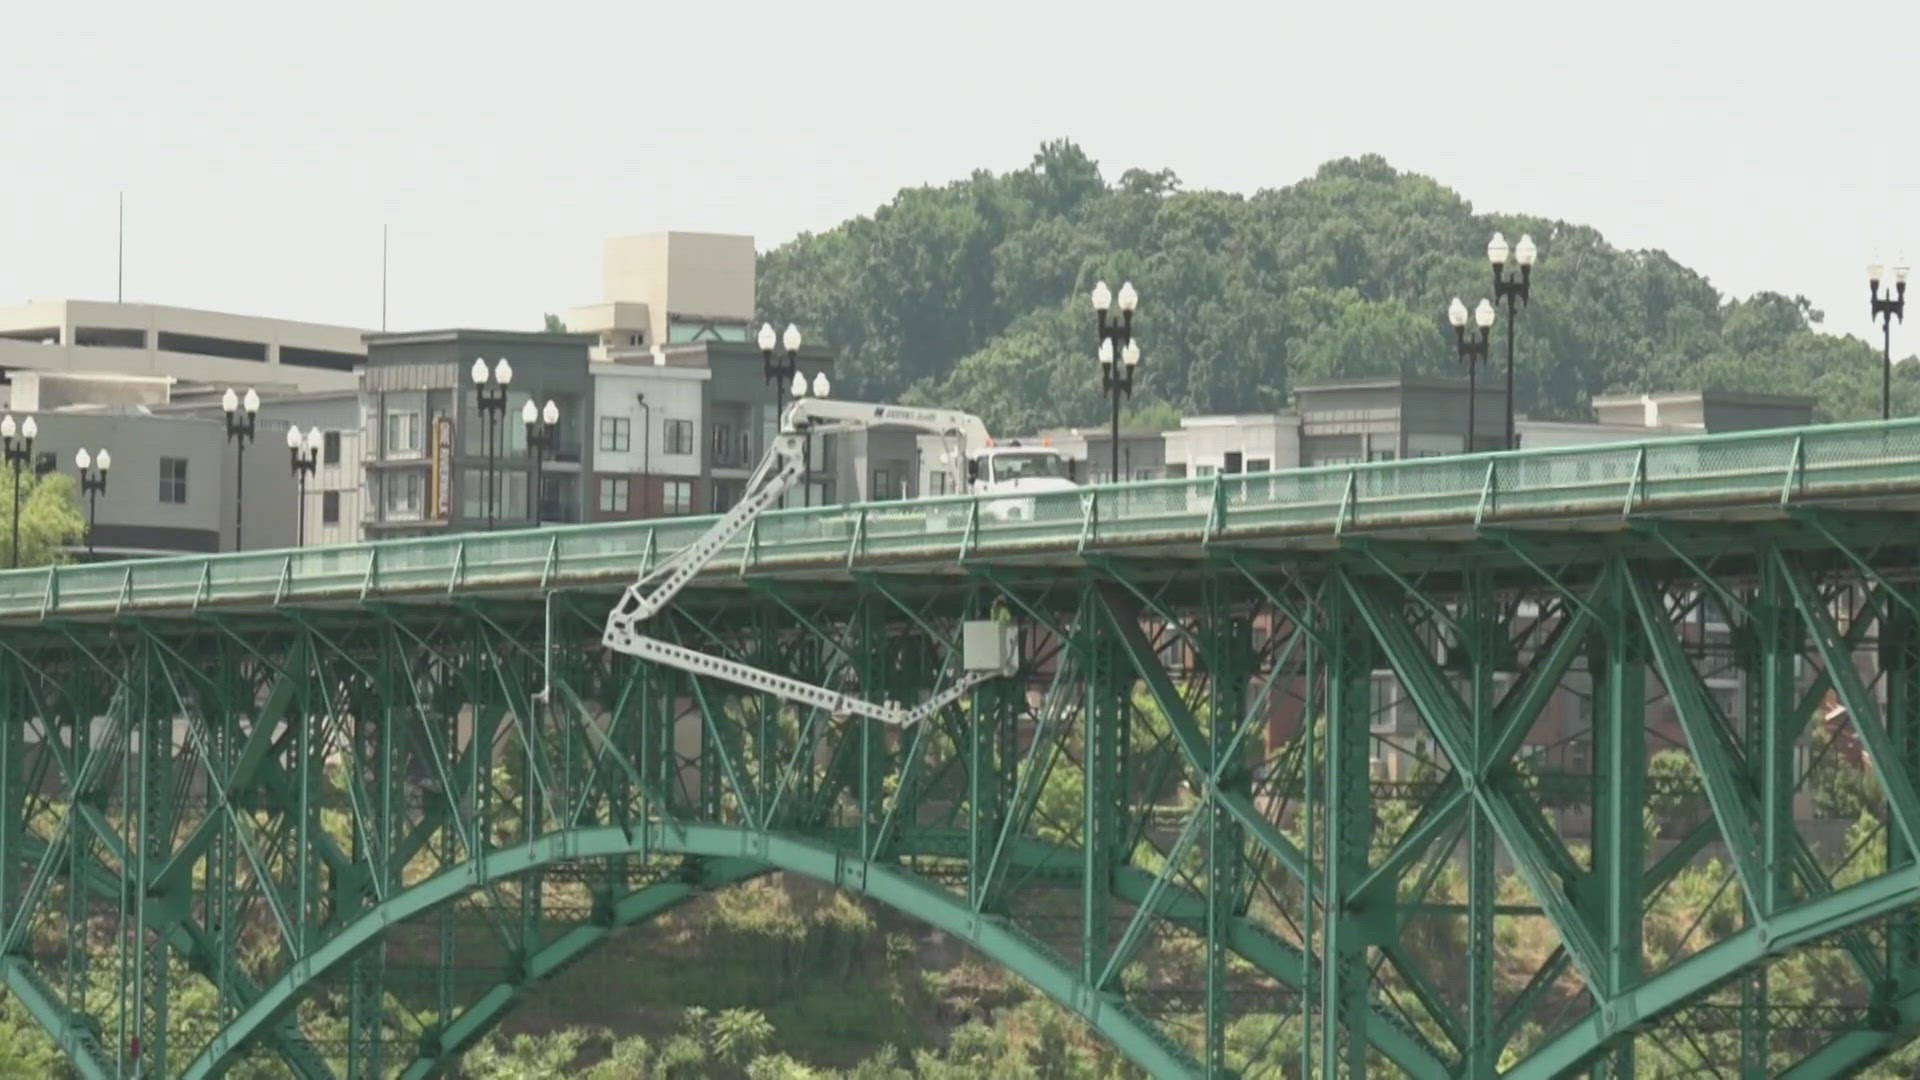 The Tennessee Department of Transportation said it performs an inspection every year. On Tuesday, it found an issue with a steel truss on the Gay Street Bridge.